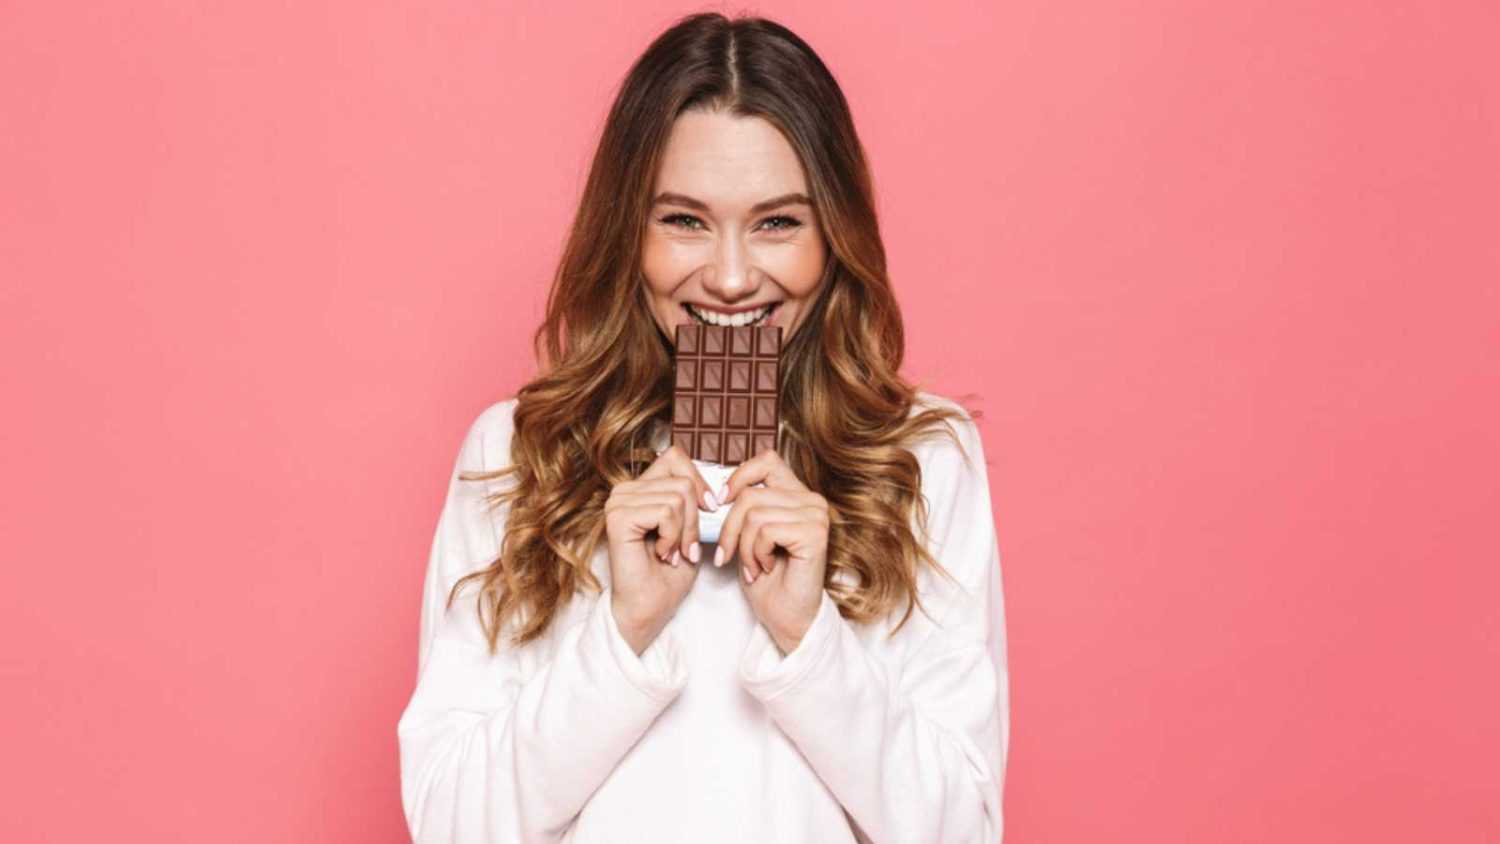 Portrait of a happy young woman biting chocolate bar isolated over pink background